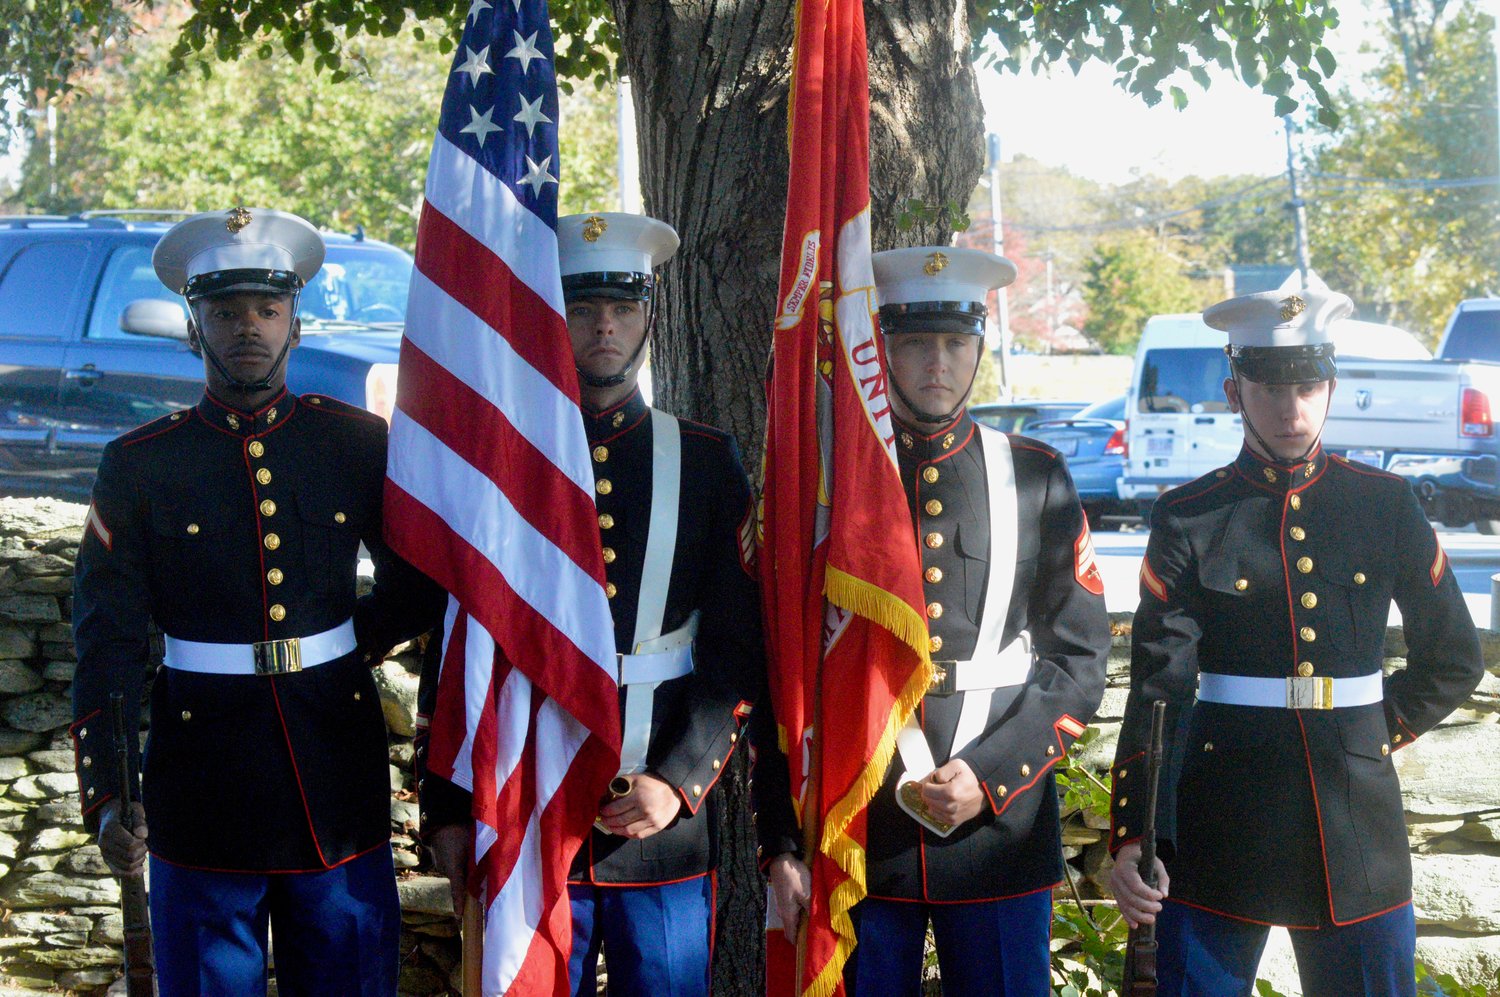 The U.S. Marine color guard consisted of Private First Class Lamont A. Watson, Sgt. Alix Benjamin, Sgt. Joseph Harding, and Private First Class Ryan D. Morgan.